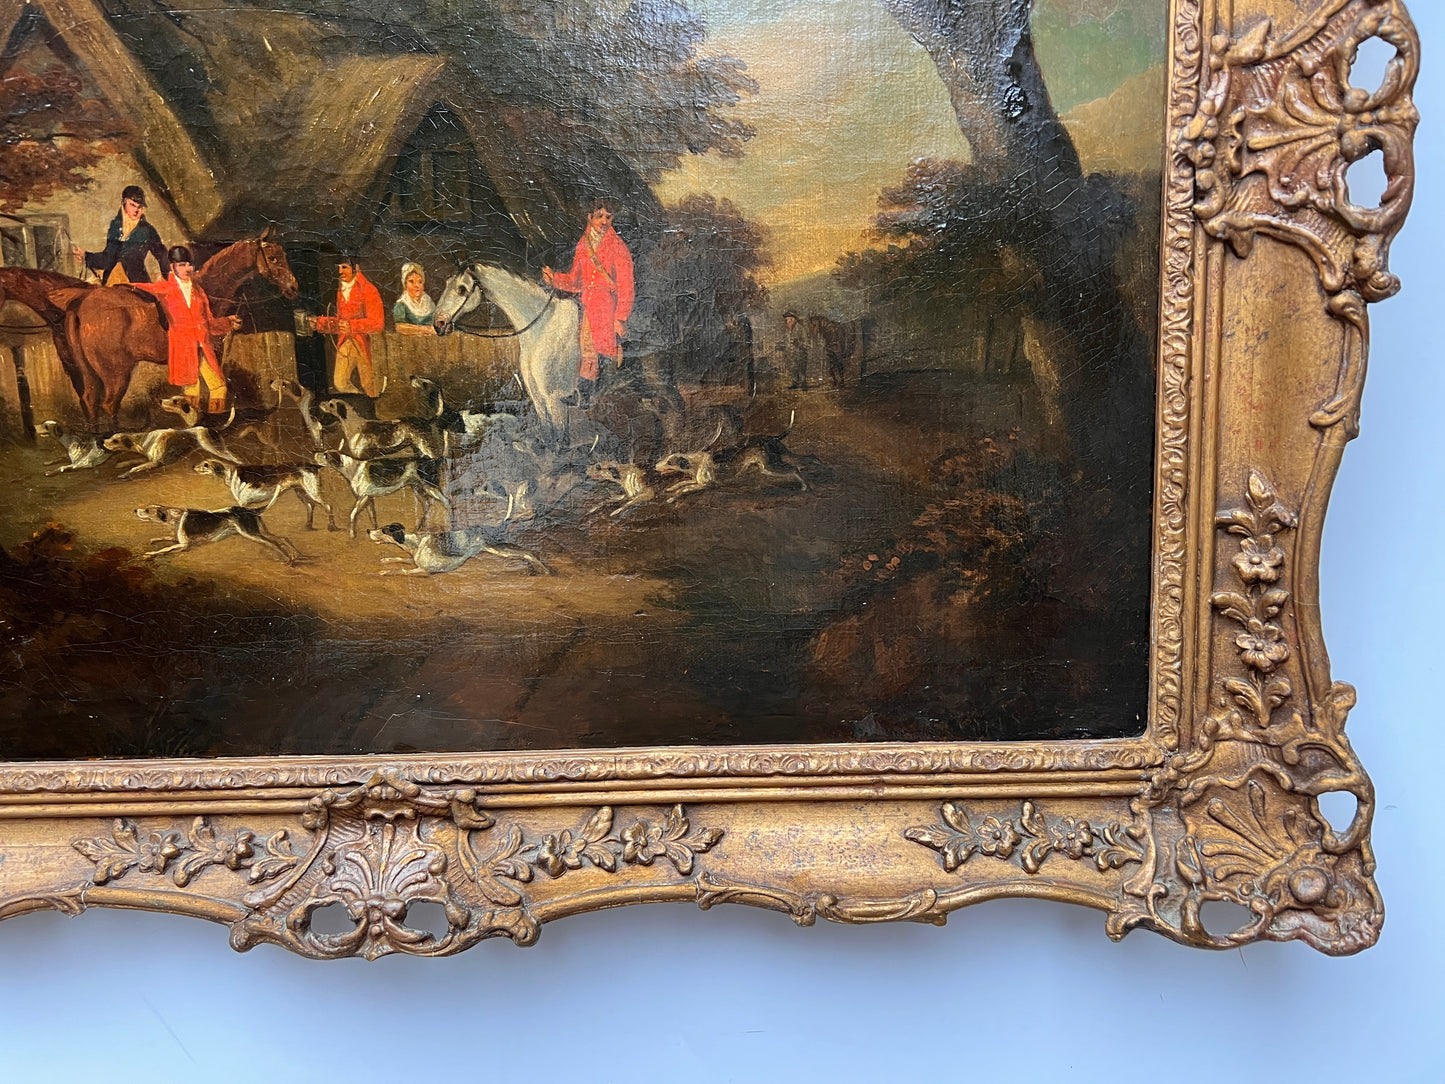 Antique 19century or earlier English School oil painting on canvas Hunting scene